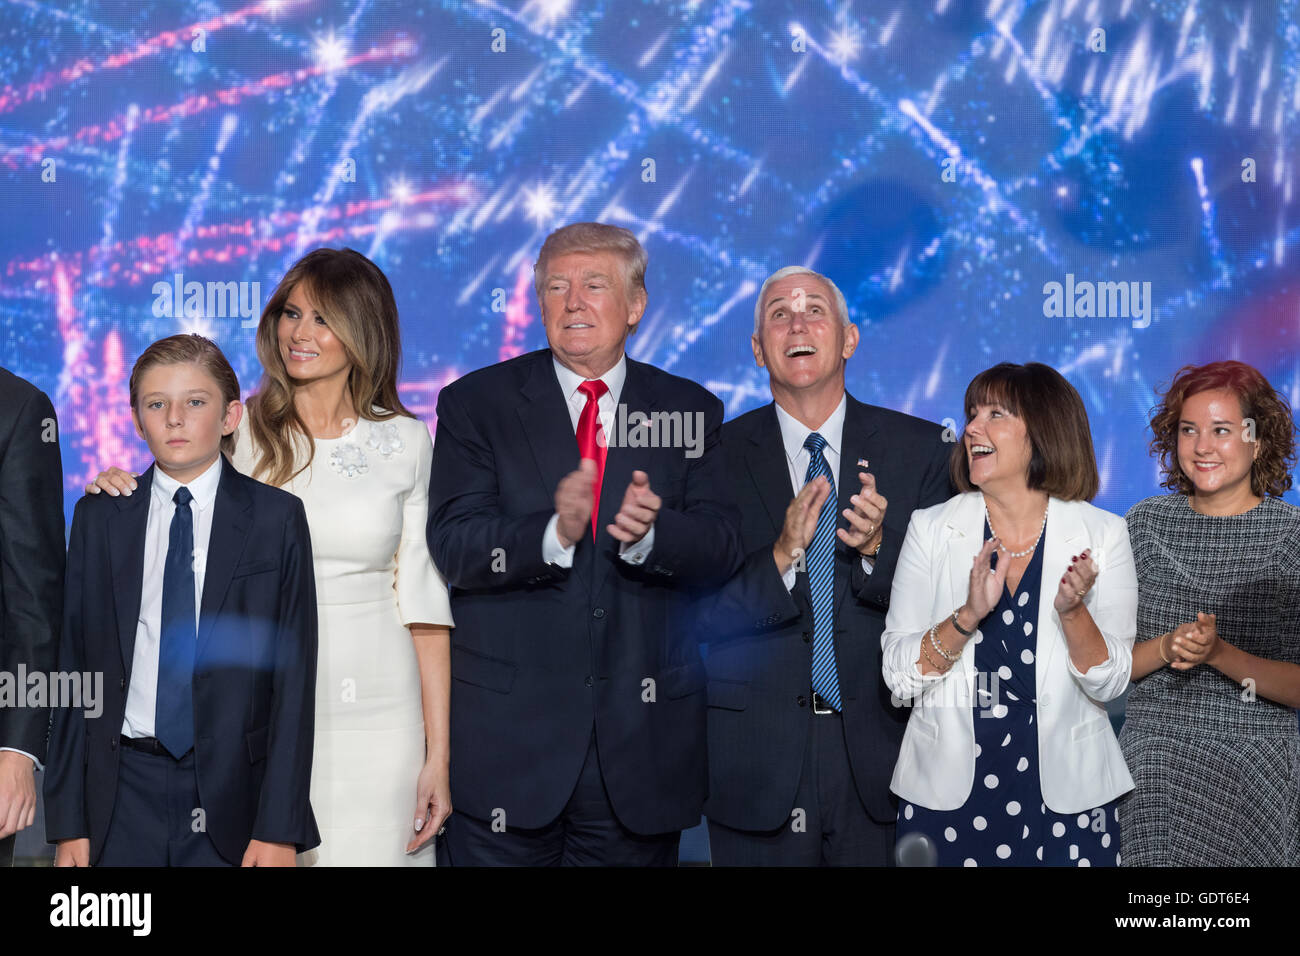 Cleveland, Ohio, USA. 21st July, 2016. GOP Presidential candidate Donald Trump stands with running mate Gov. Mike Pence and family members as balloons an confetti drop after accepting the party nomination for president on the final day of the Republican National Convention July 21, 2016 in Cleveland, Ohio. Credit:  Planetpix/Alamy Live News Stock Photo